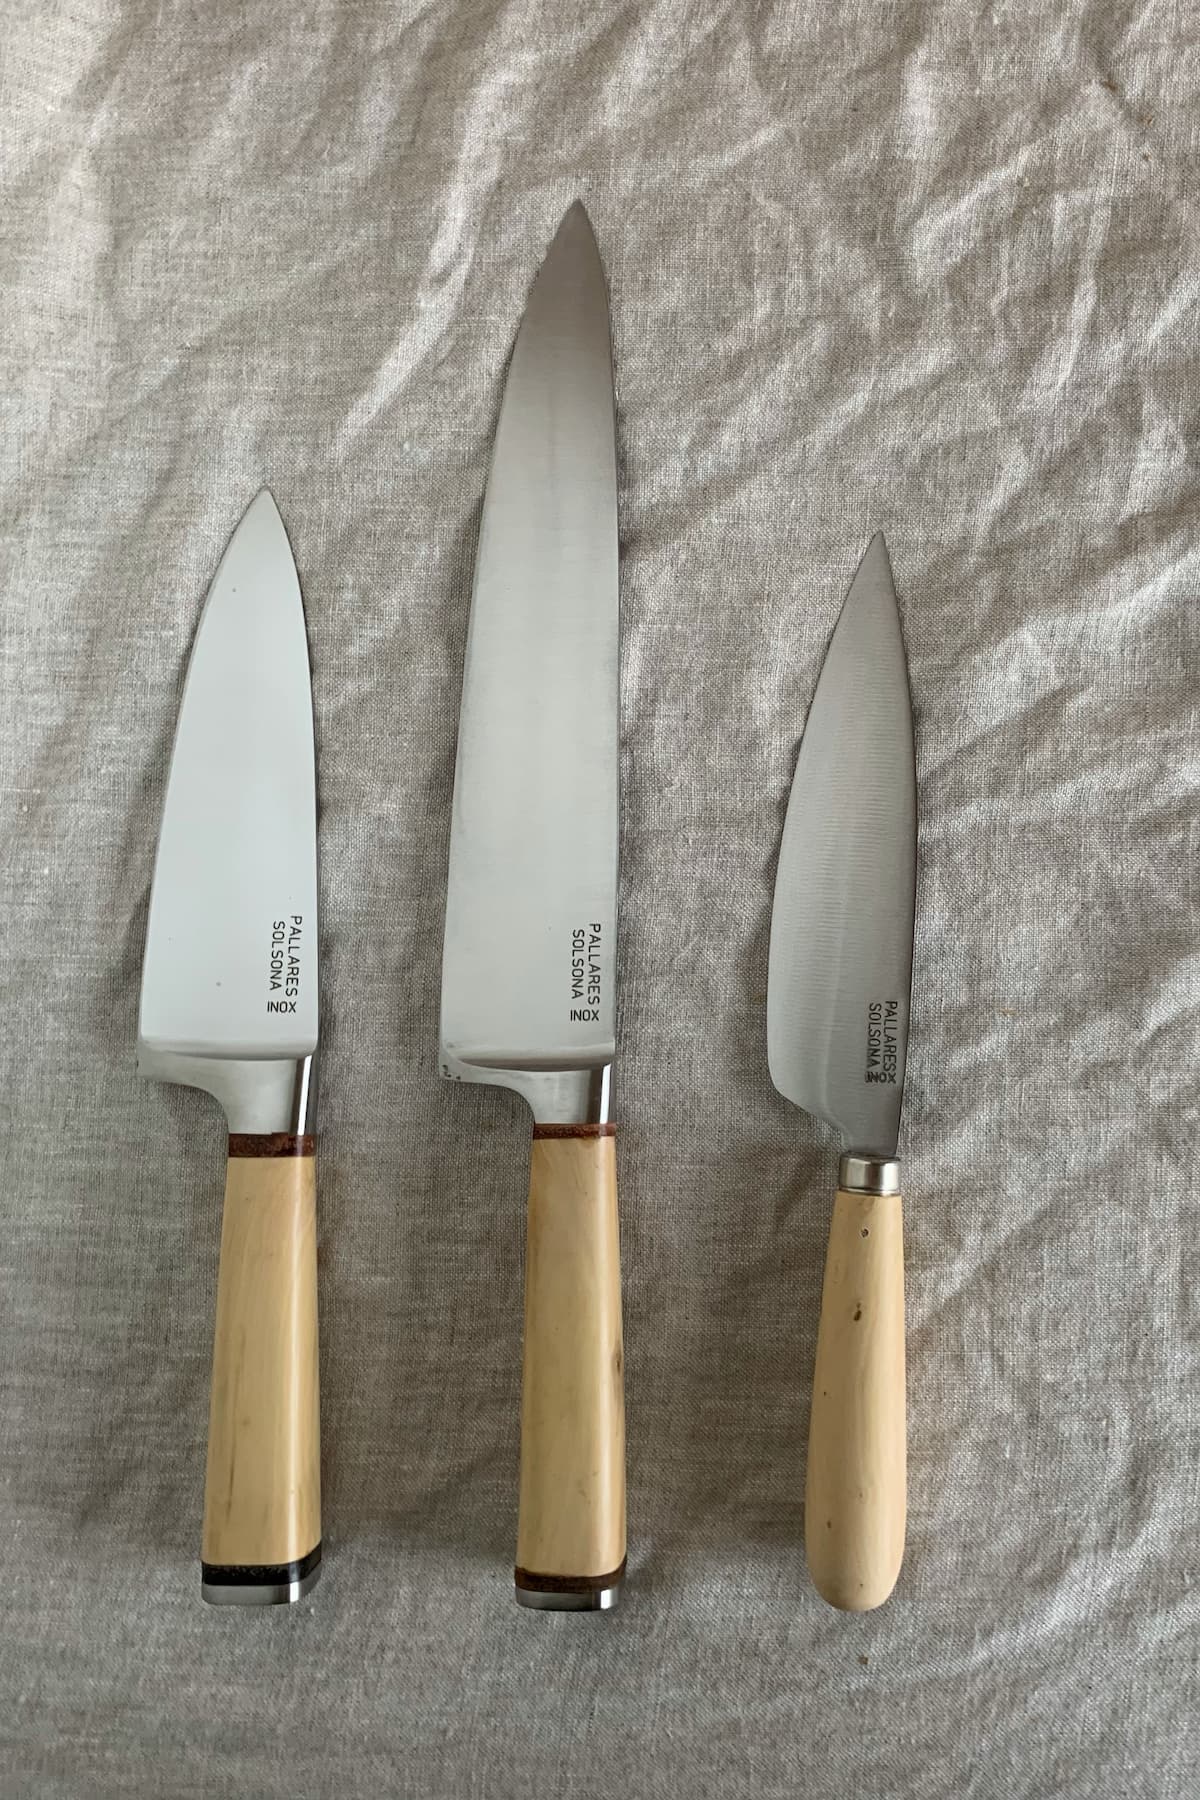 chef's knife 15cm boxwood stainless steel